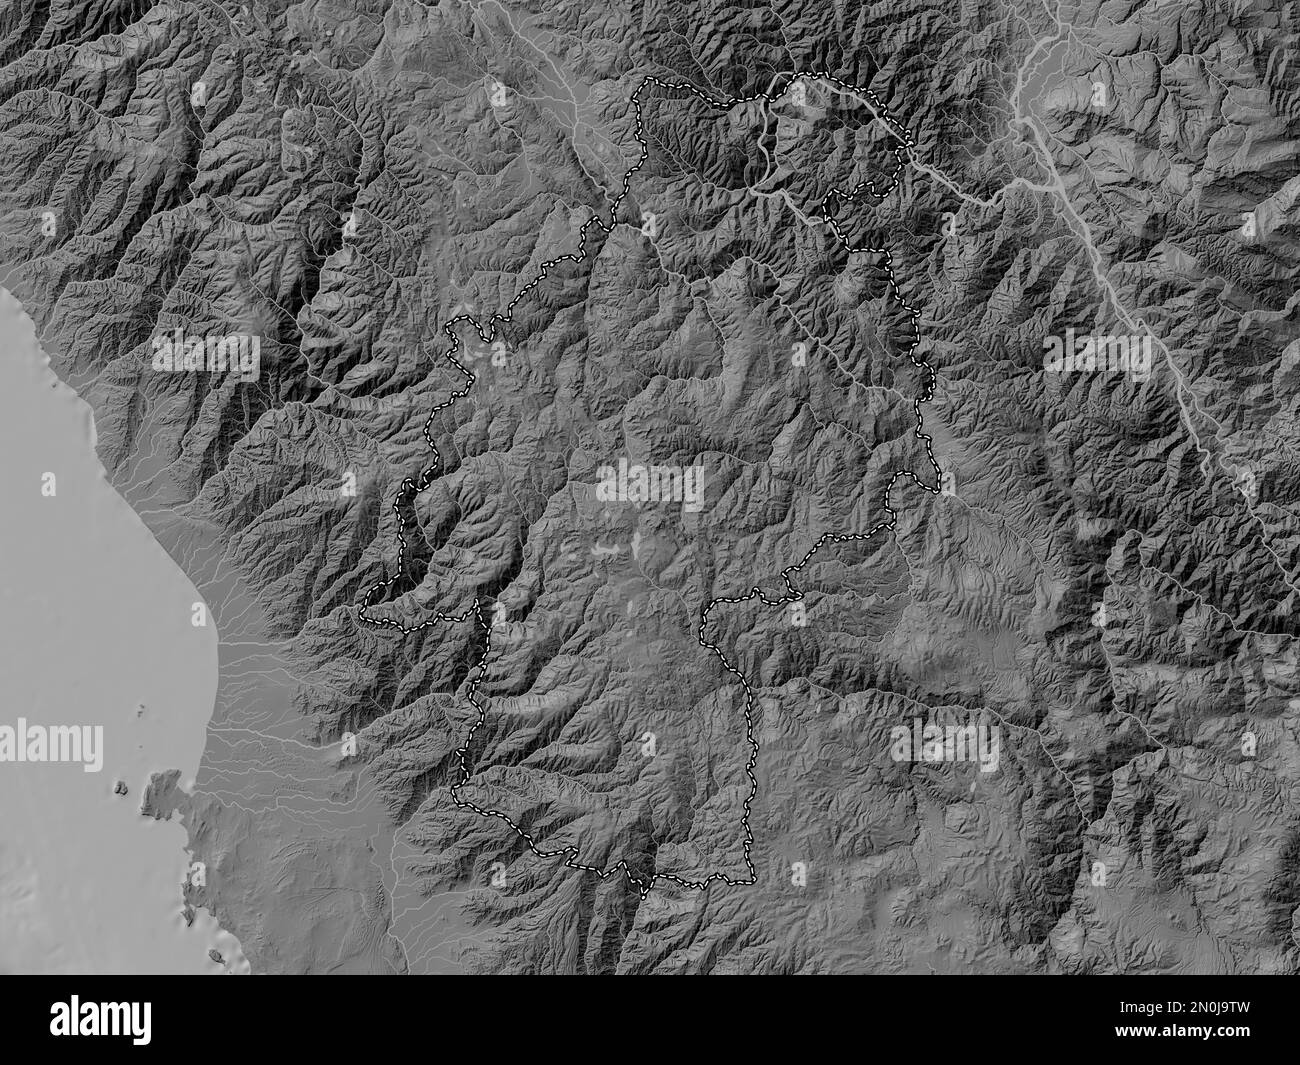 Huancavelica, region of Peru. Bilevel elevation map with lakes and rivers Stock Photo